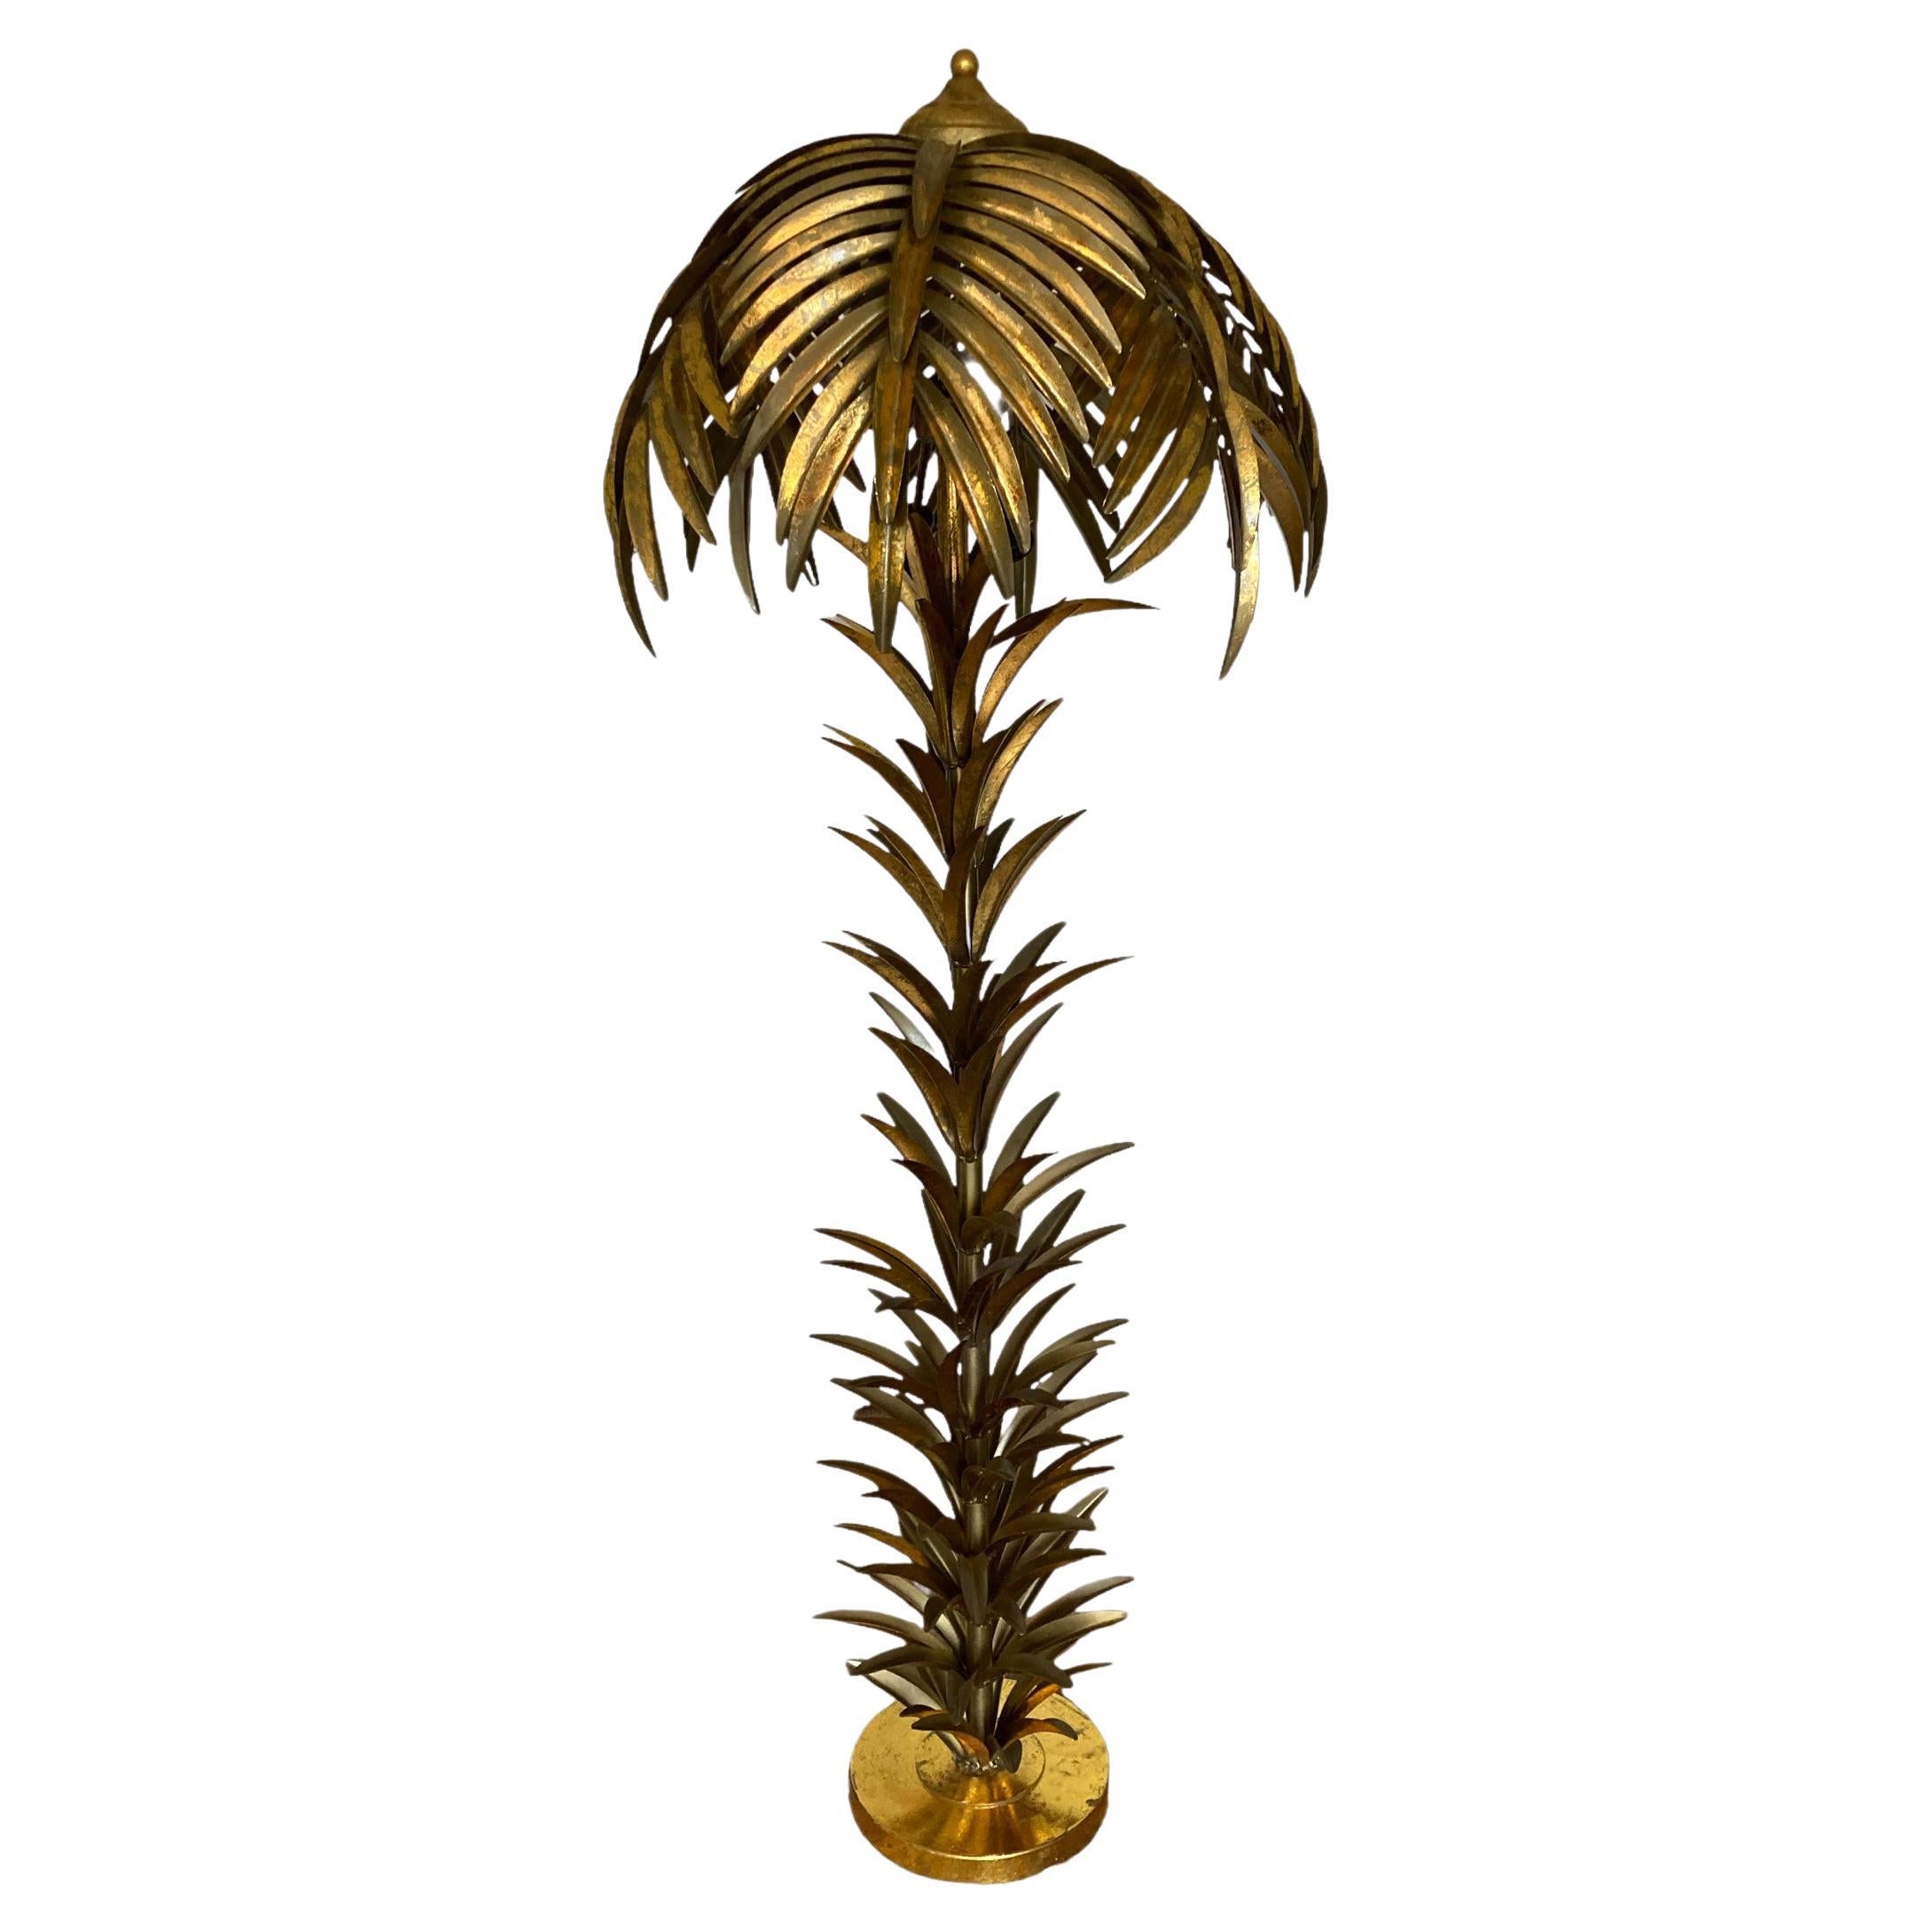 Hollywood Regency Style Gilt Metal Palm Tree Floor Lamp, Mid to late 20C